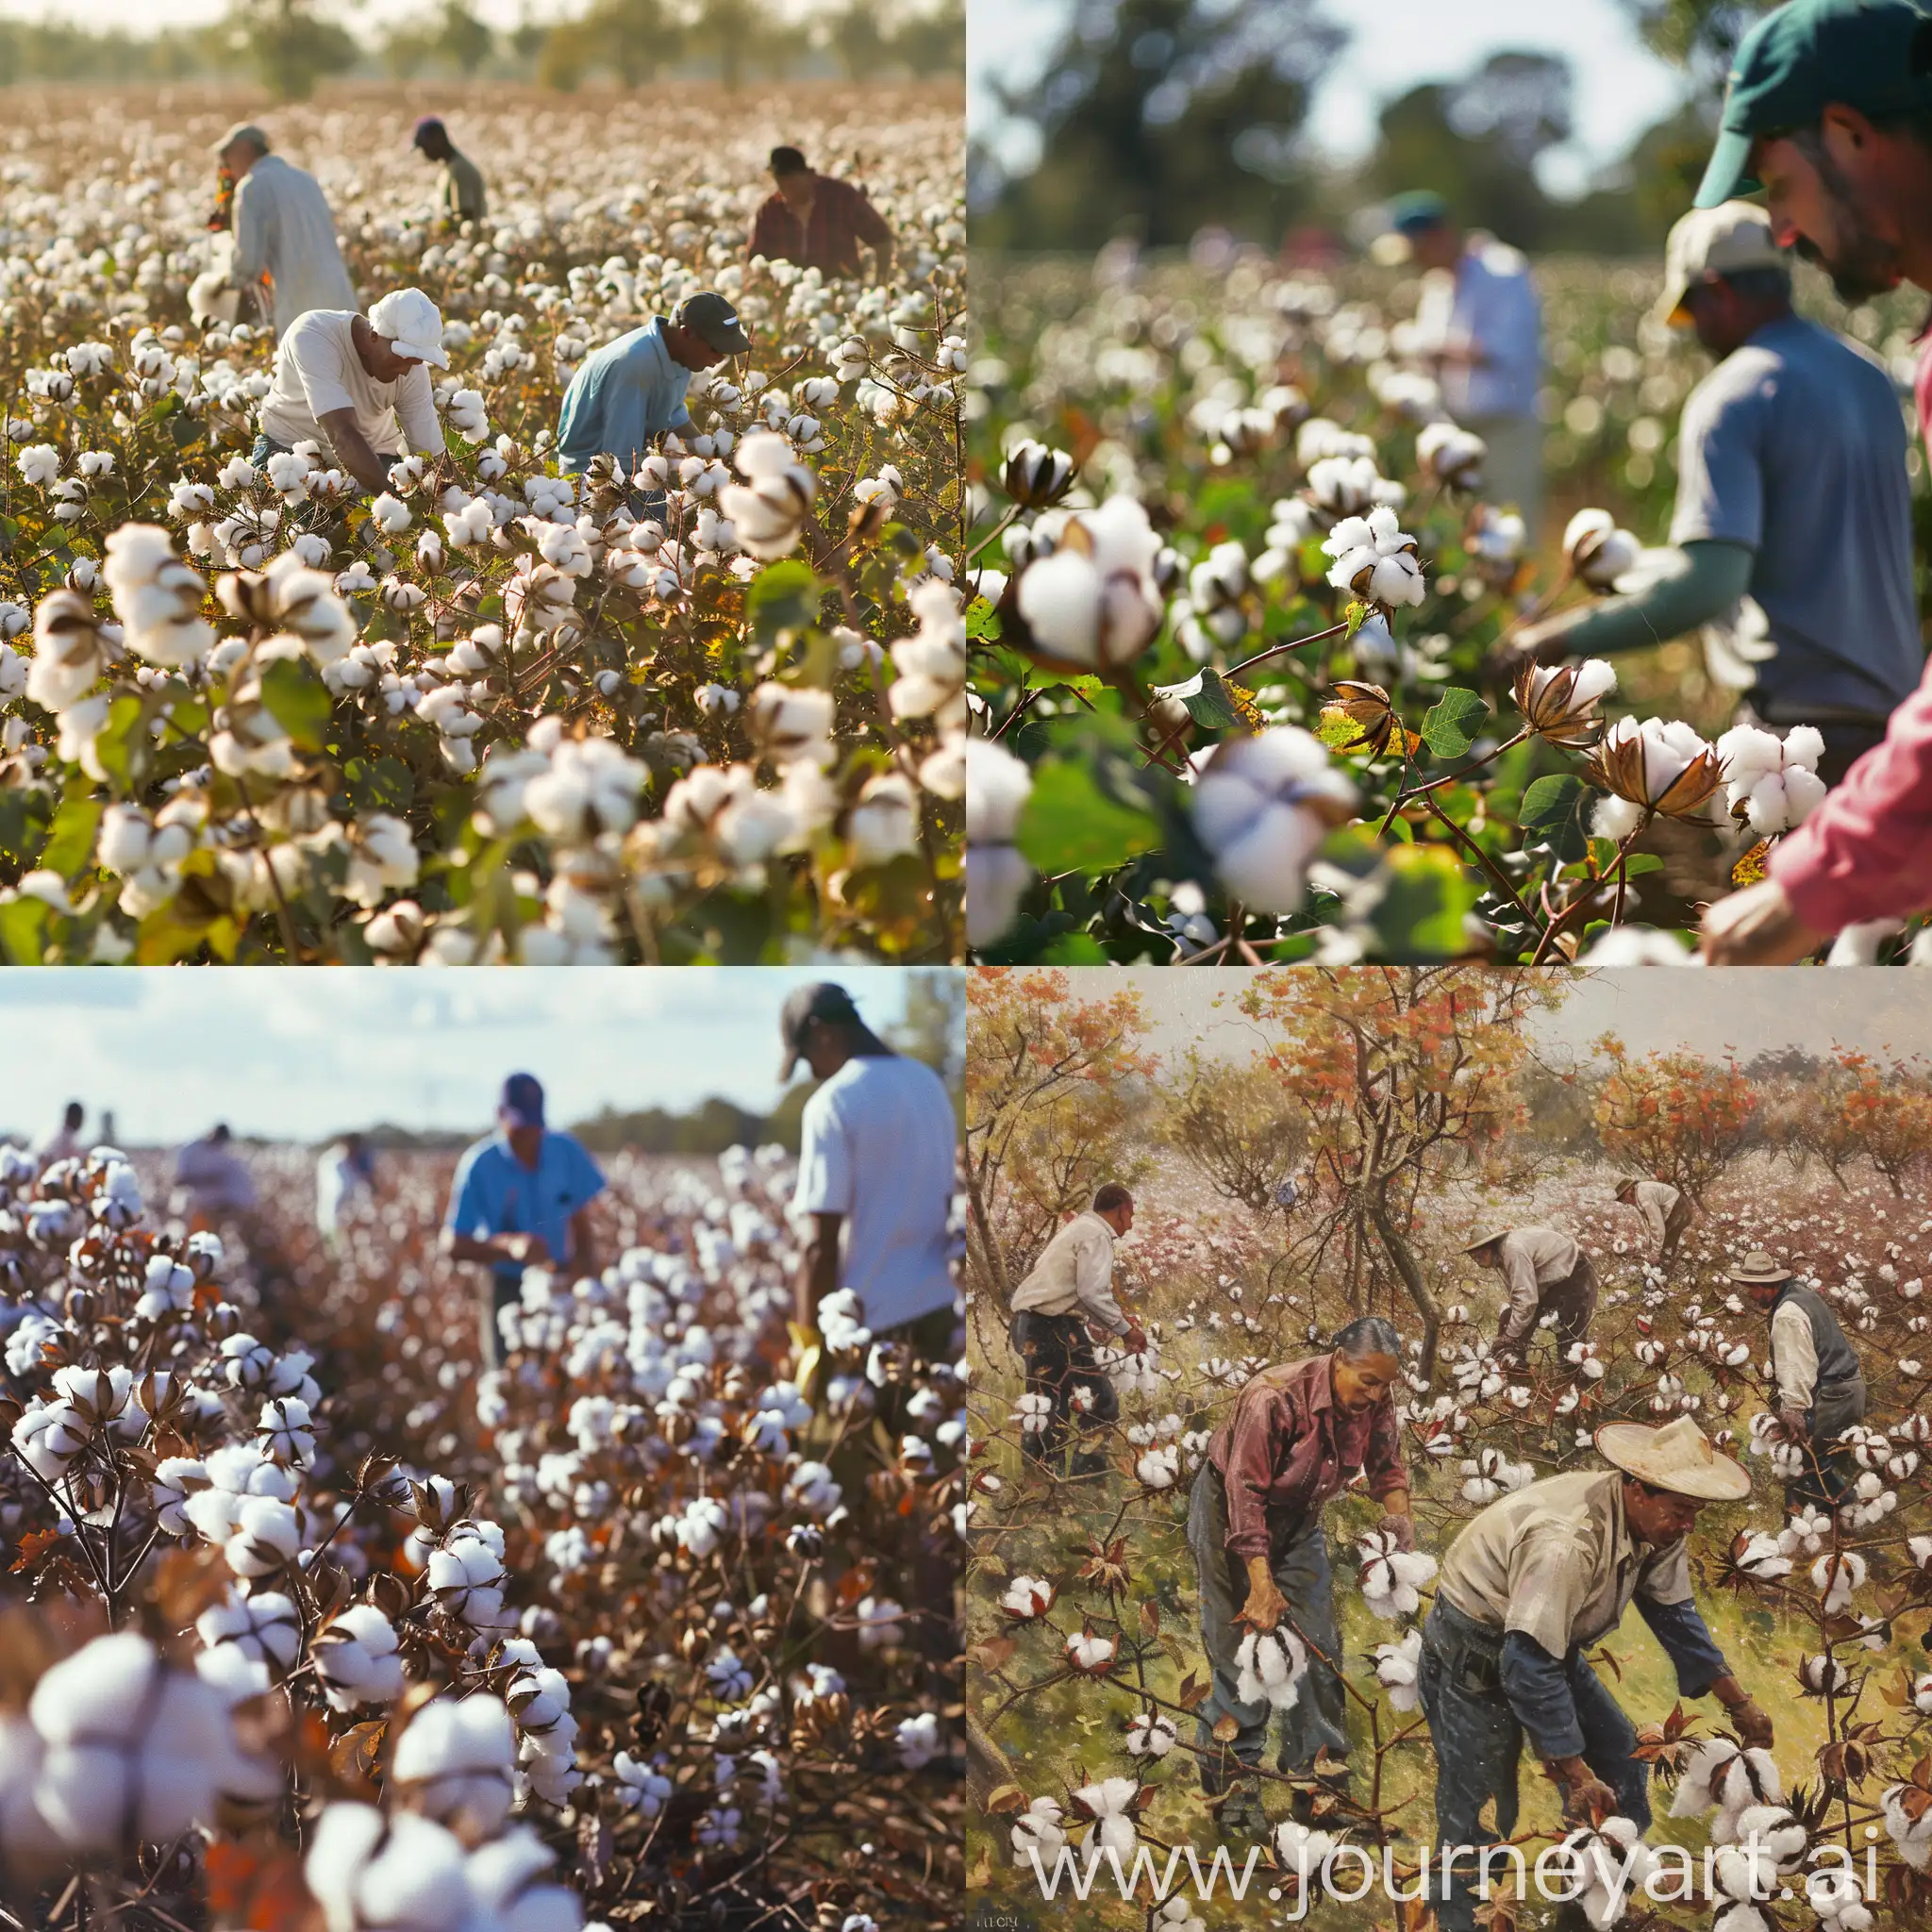 Harvesting-Cotton-Field-Workers-Gathering-Cotton-Bolls